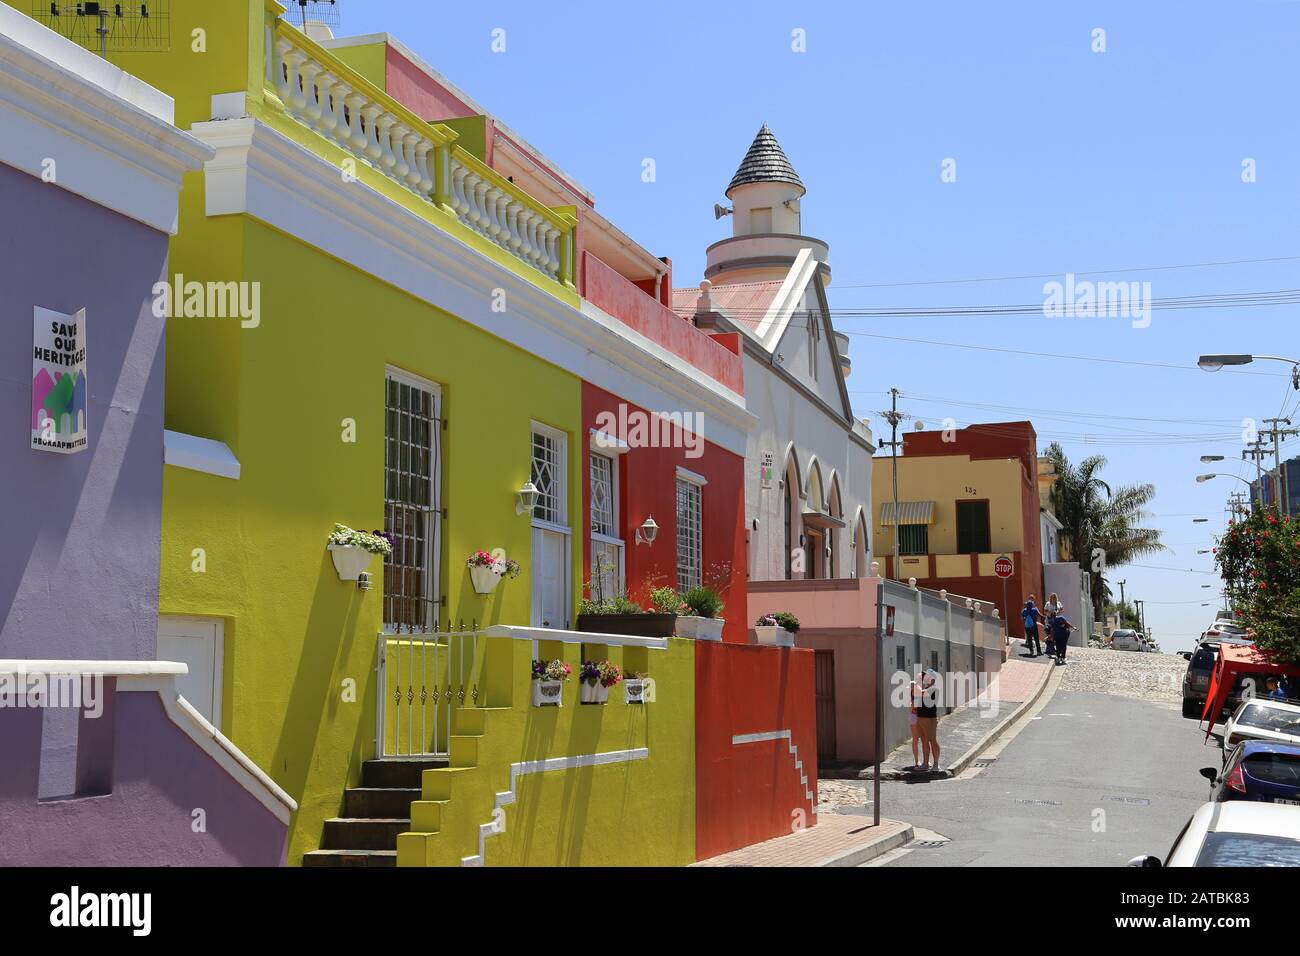 Brightly painted houses, Chiappini Street, Bo Kaap, Cape Town, Table Bay, Western Cape Province, South Africa, Africa Stock Photo